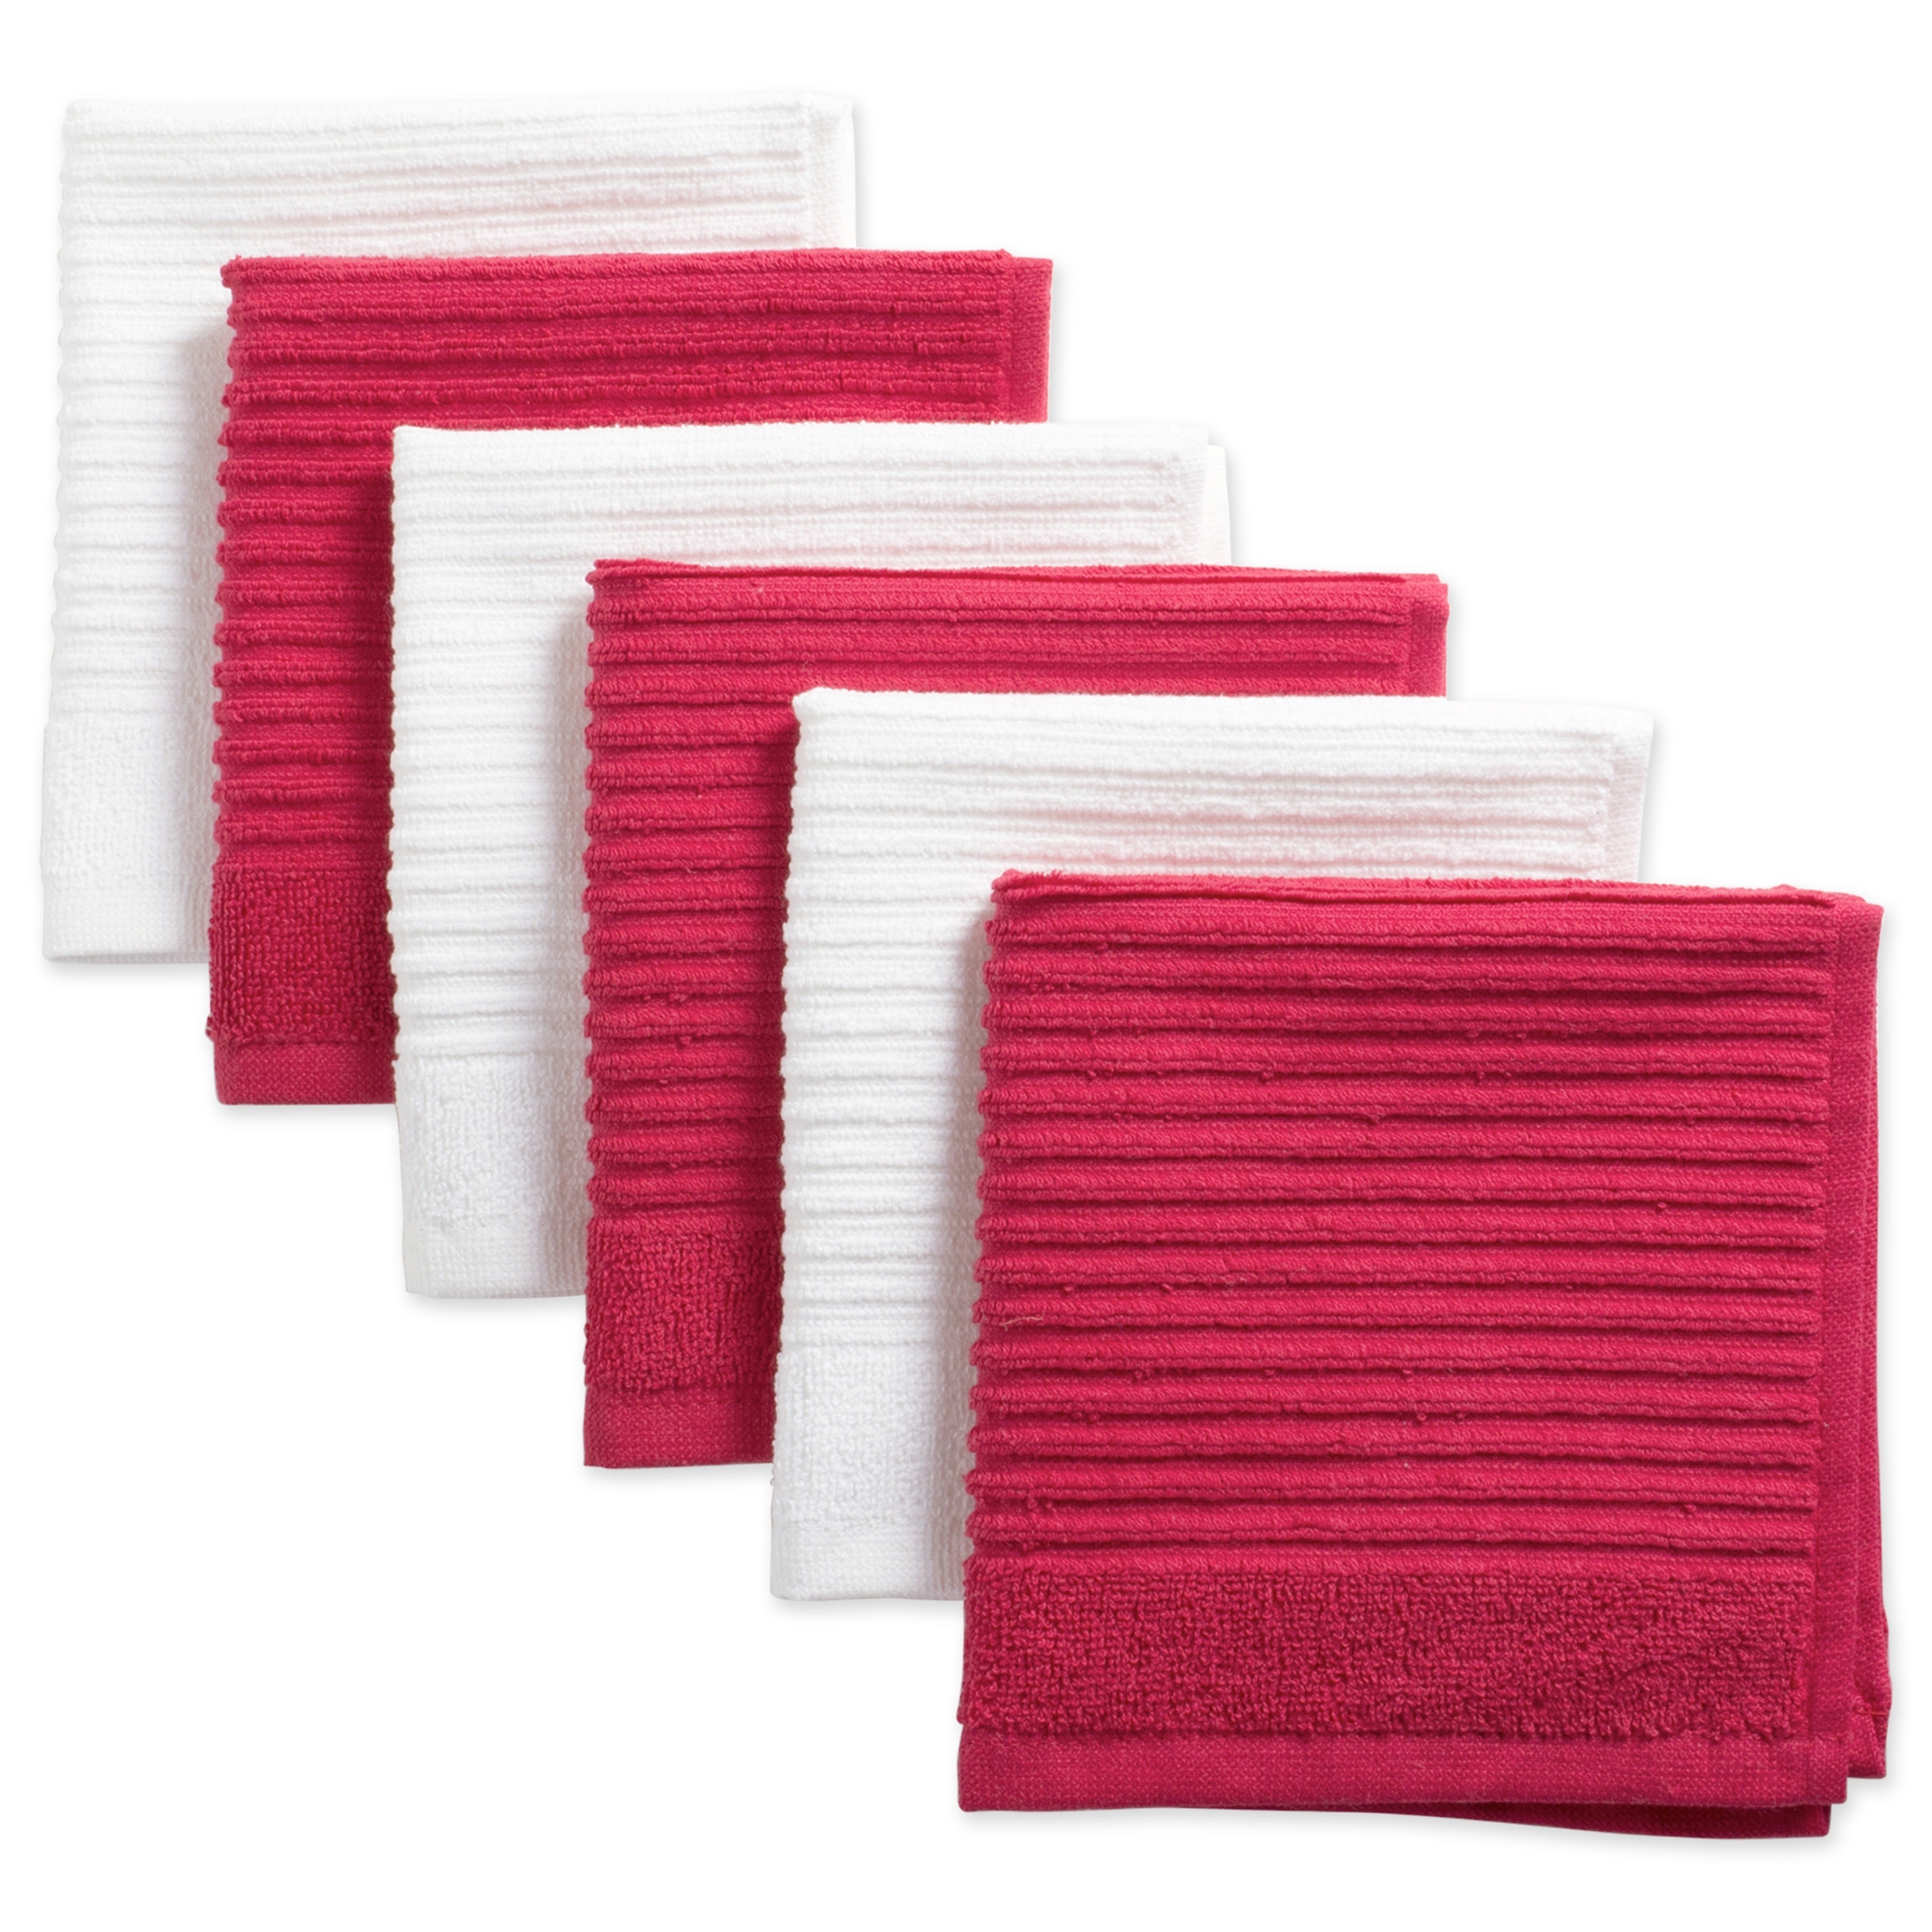 Dish Cloths for Washing Dishes Red and Turquoise Kitchen Cloths Cleaning Cloths 12 in x 12 in - 8 Pack